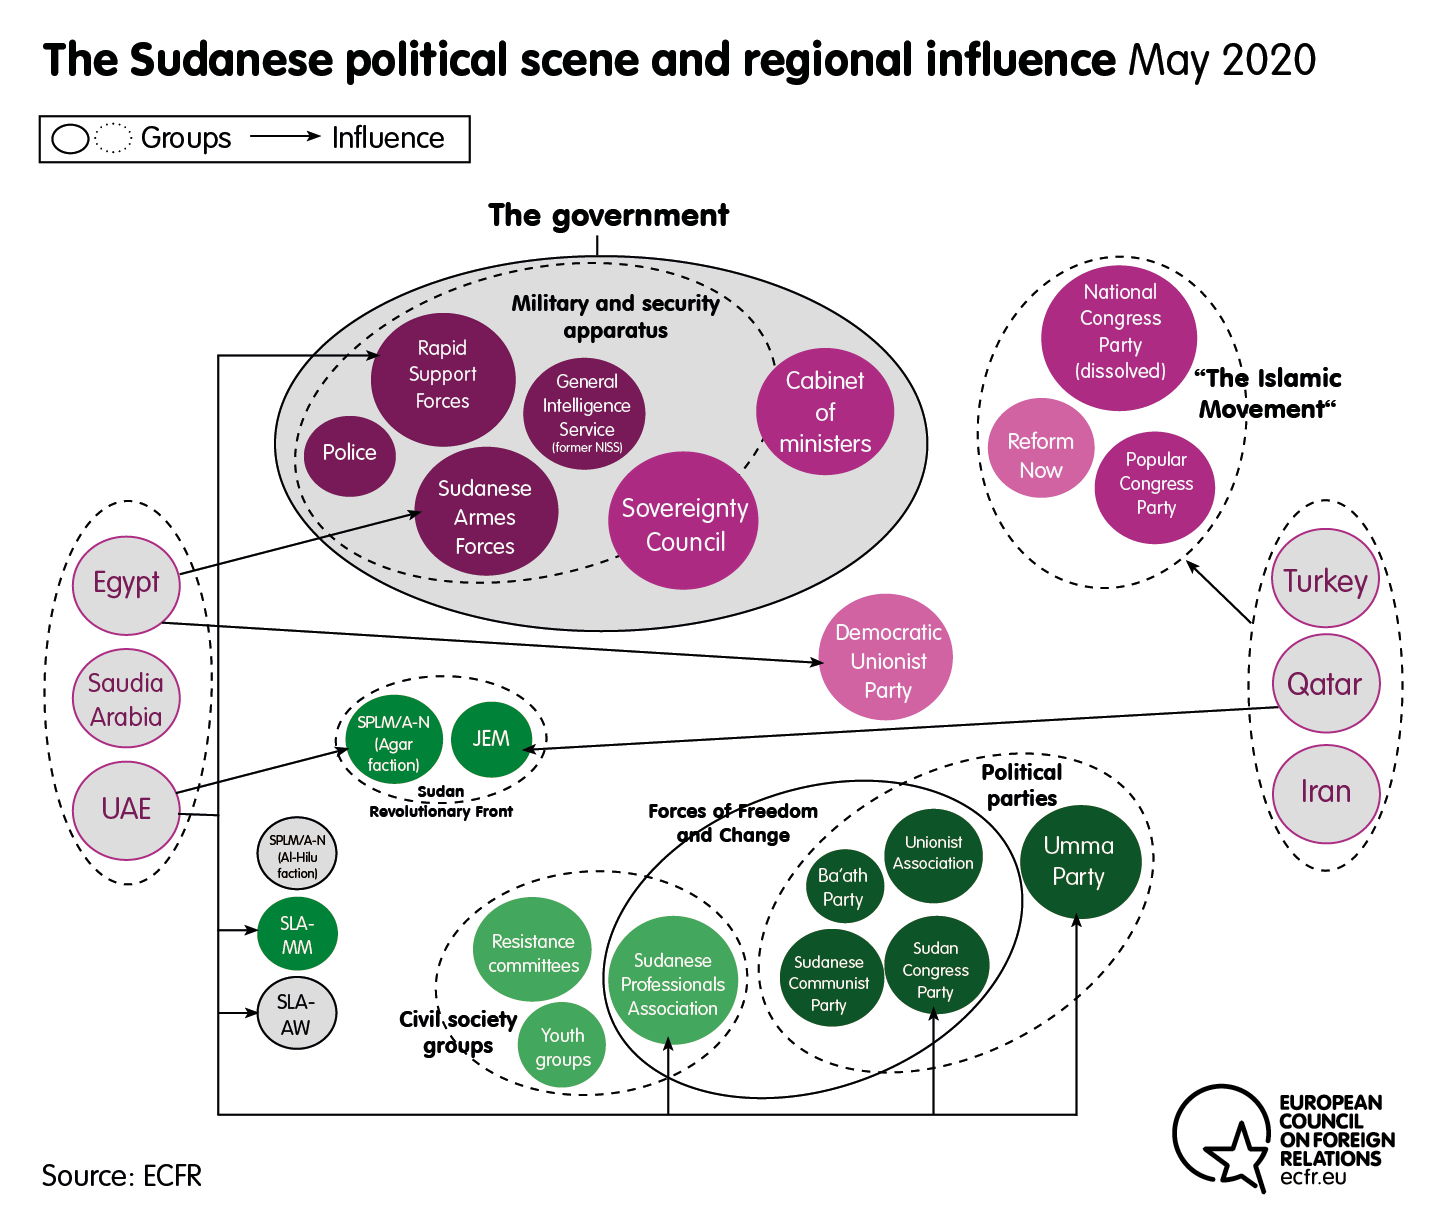 The Sudanese political scene and regional influence in May 2020